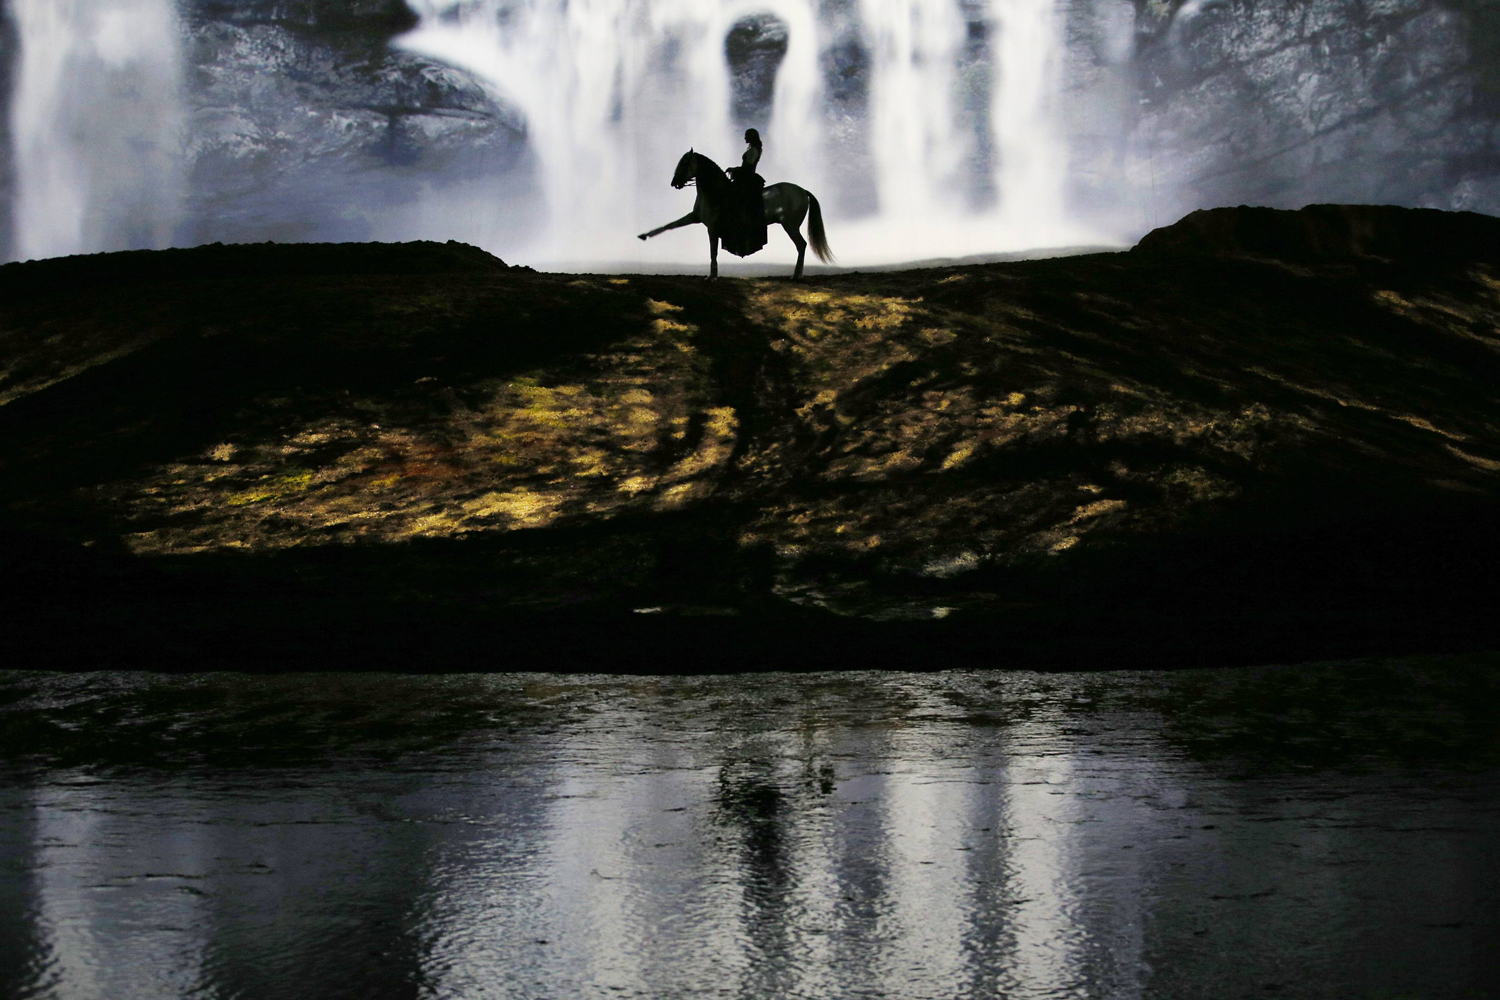 A horse and rider perform during a "sneak peek" performance of Cavalia's show "Odysseo" in Somerville